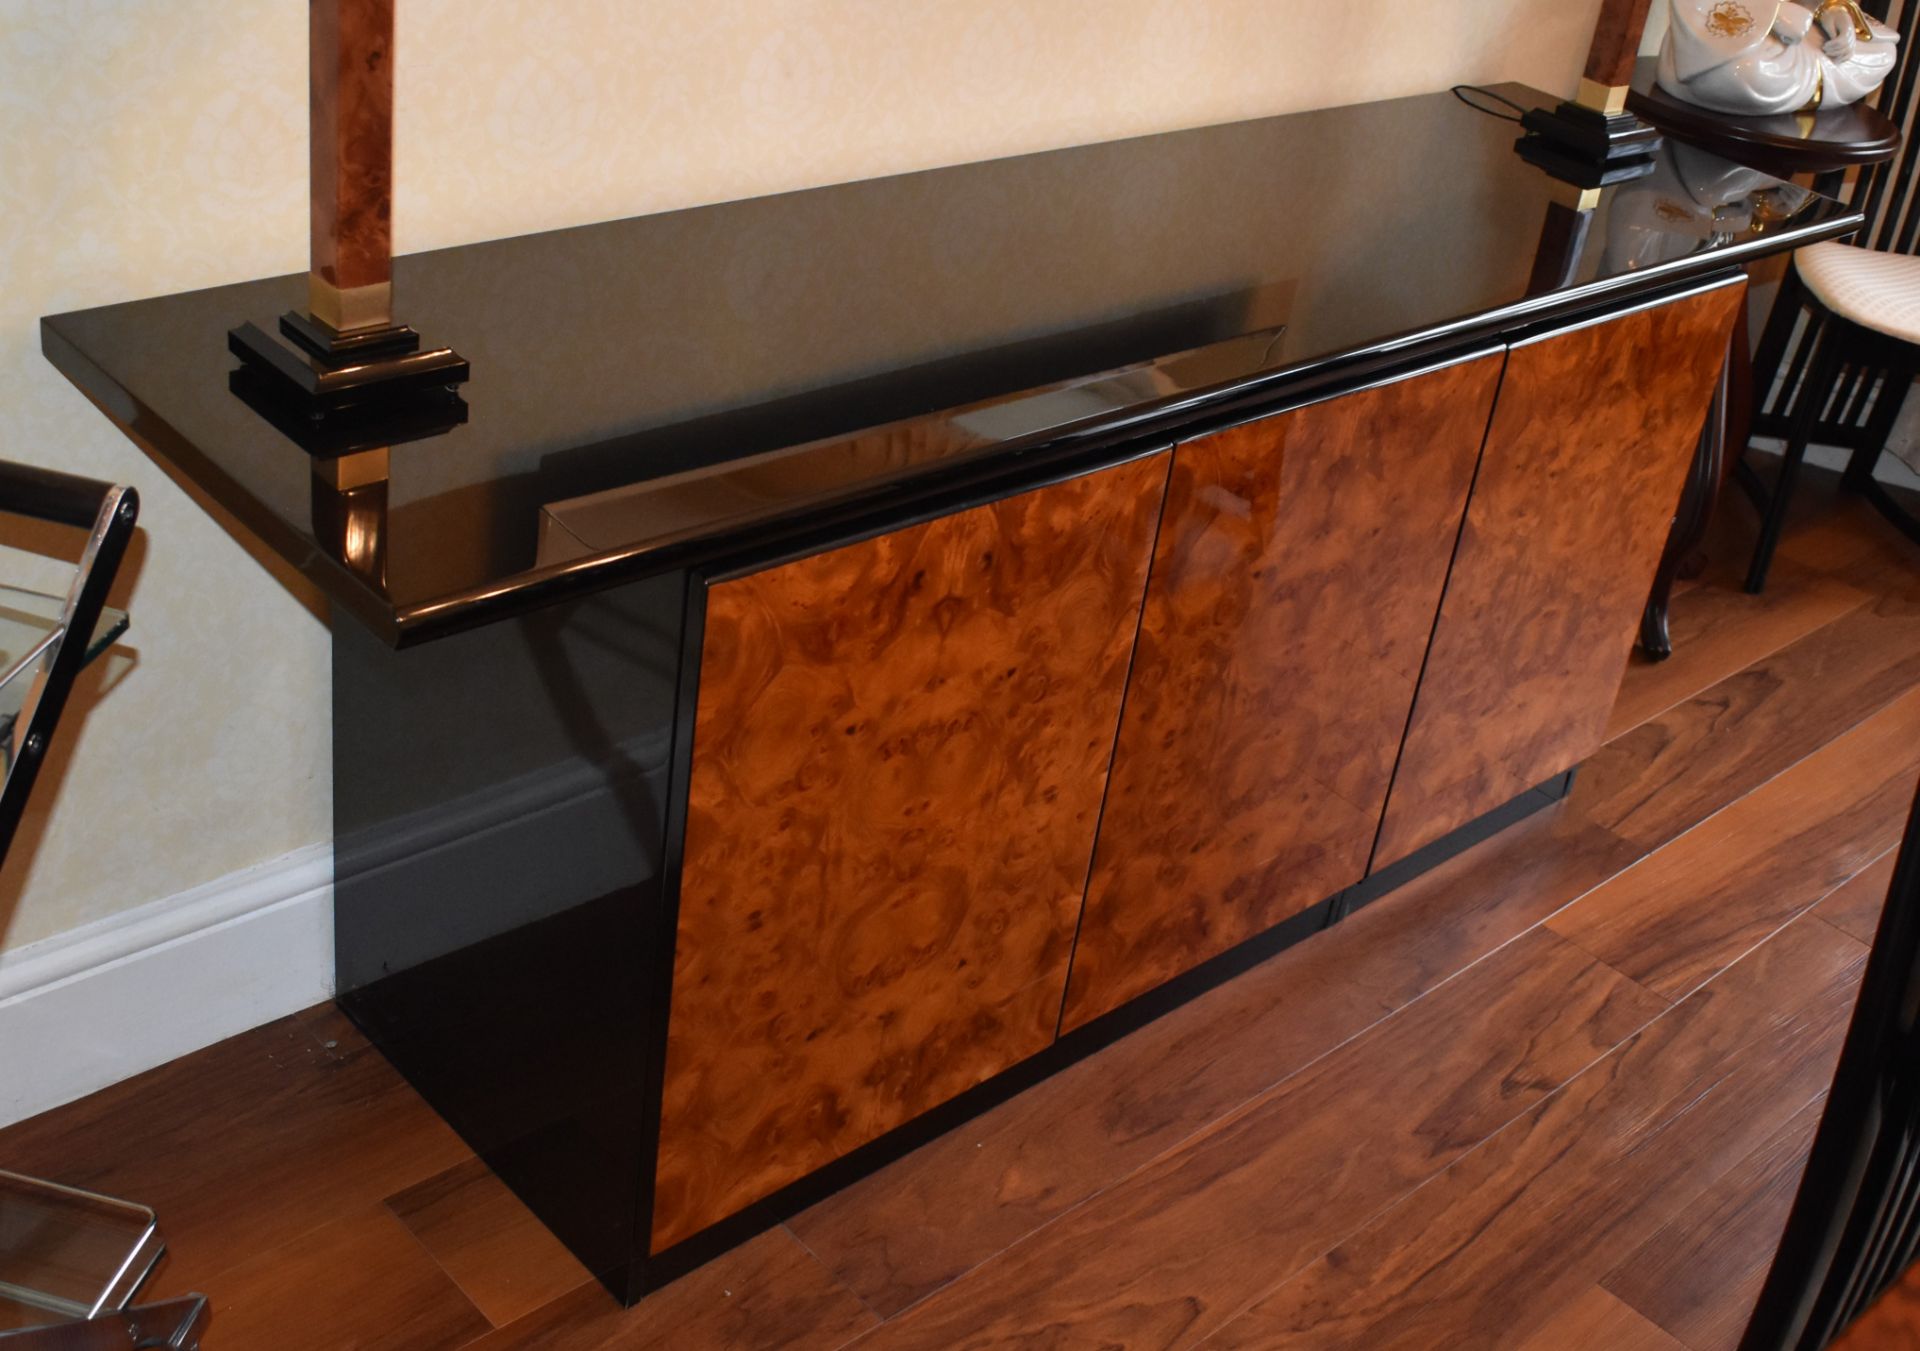 1 x Contemporary Three Door Sideboard With Dark Gloss Finish and Burr Walnut Doors - Dimensions